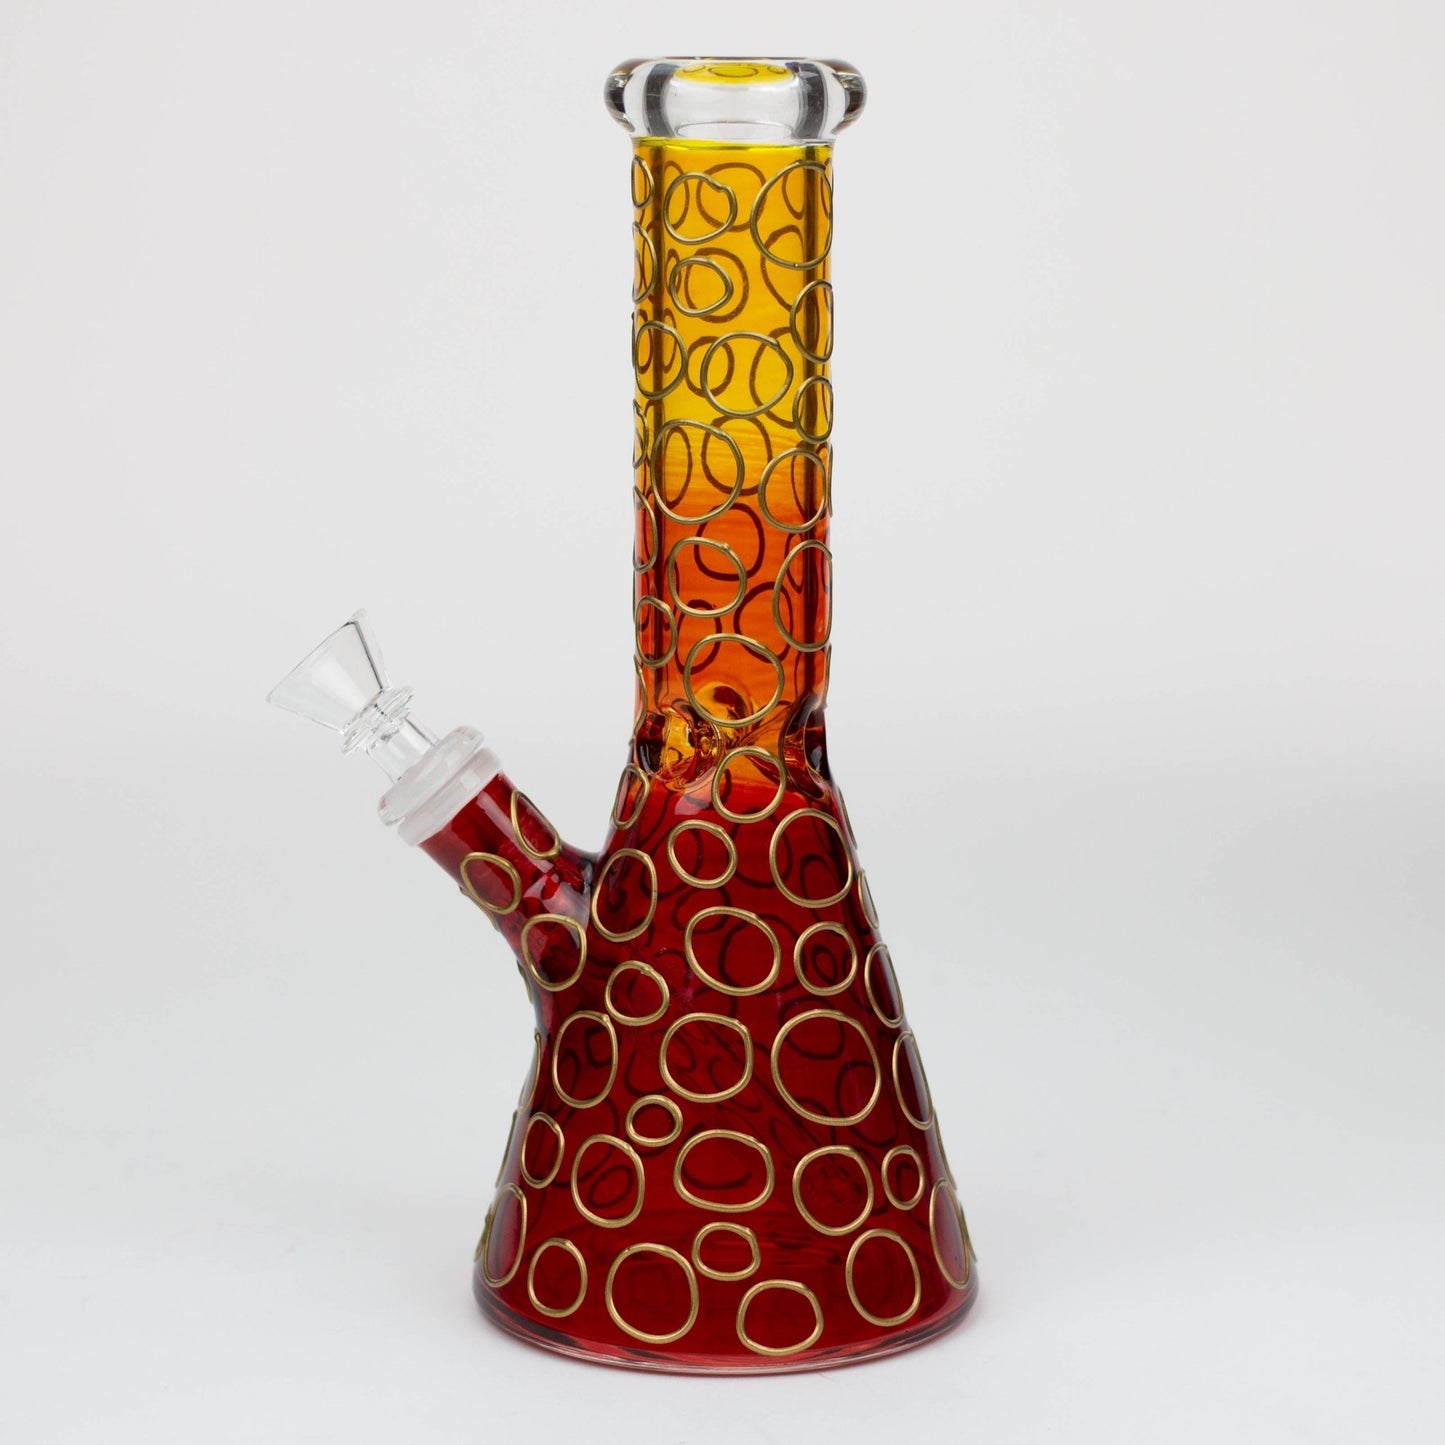 
Height : 10"
3D Texture

3 Pinched Ice Catcher
Thick bowl for 14 mm female joint
5" down stem for 18 mm female joint
Tube : 1.5" / Base : 4"
Thickness : 5 mm
3 Piec10" 3D Texture color dots beaker glass bong [HD20]Bongsempire420